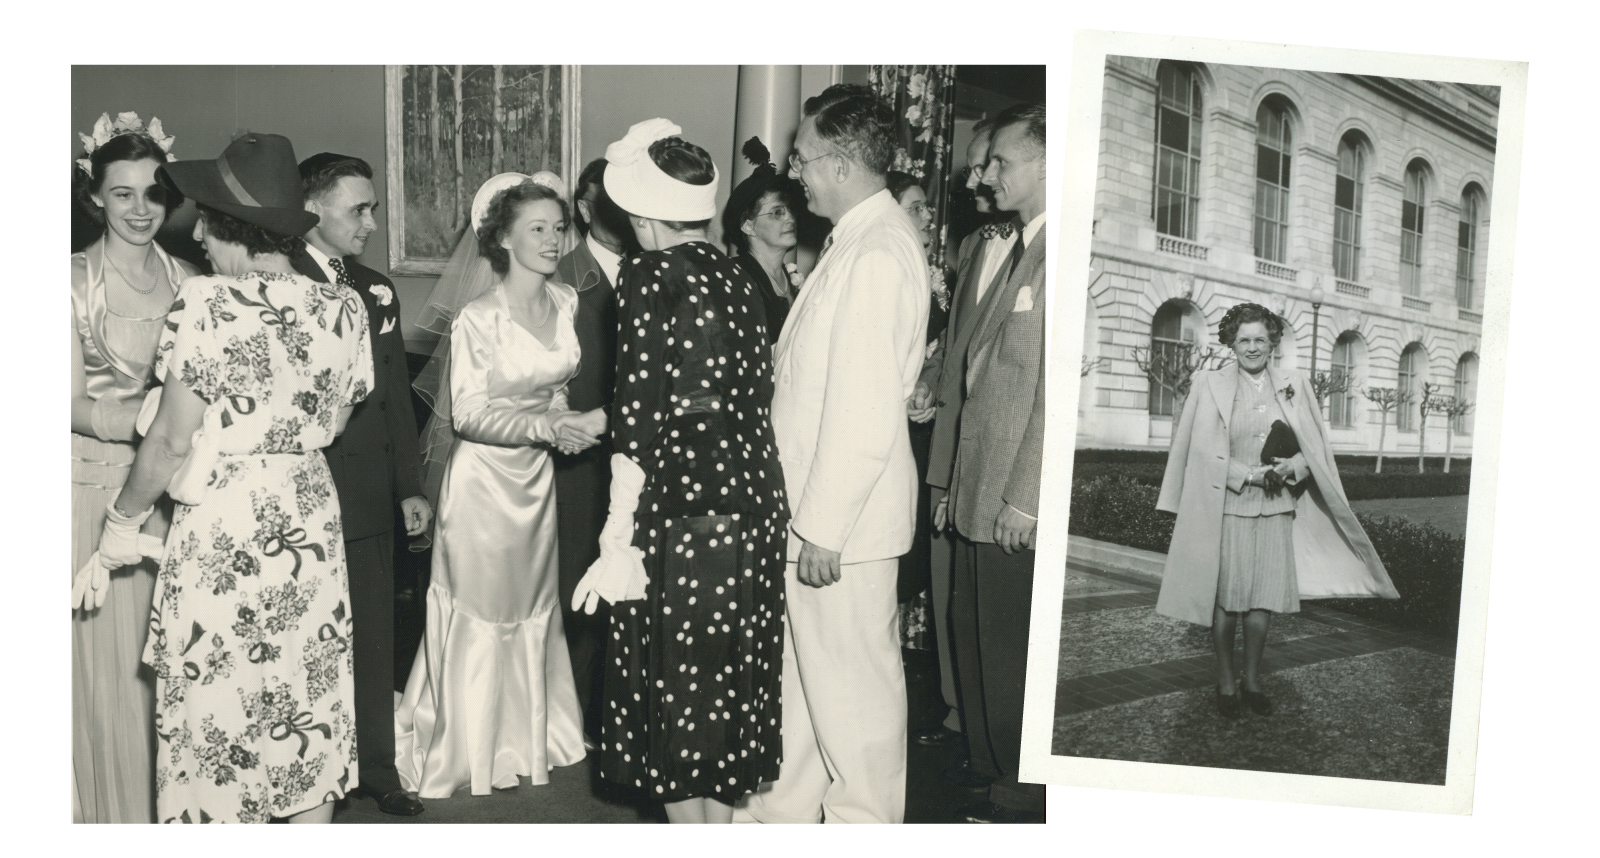 A Beautiful Life: Anne Rolt-Wheeler Skidmore married Merle Skidmore on July 25, 1949. Her sister Pat (pictured left) was a bridesmaid, and ز,Ȳַ
######### President Kenneth Brown and his wife (greeting the bride) were guests. Ruth Hobart Rolt-Wheel